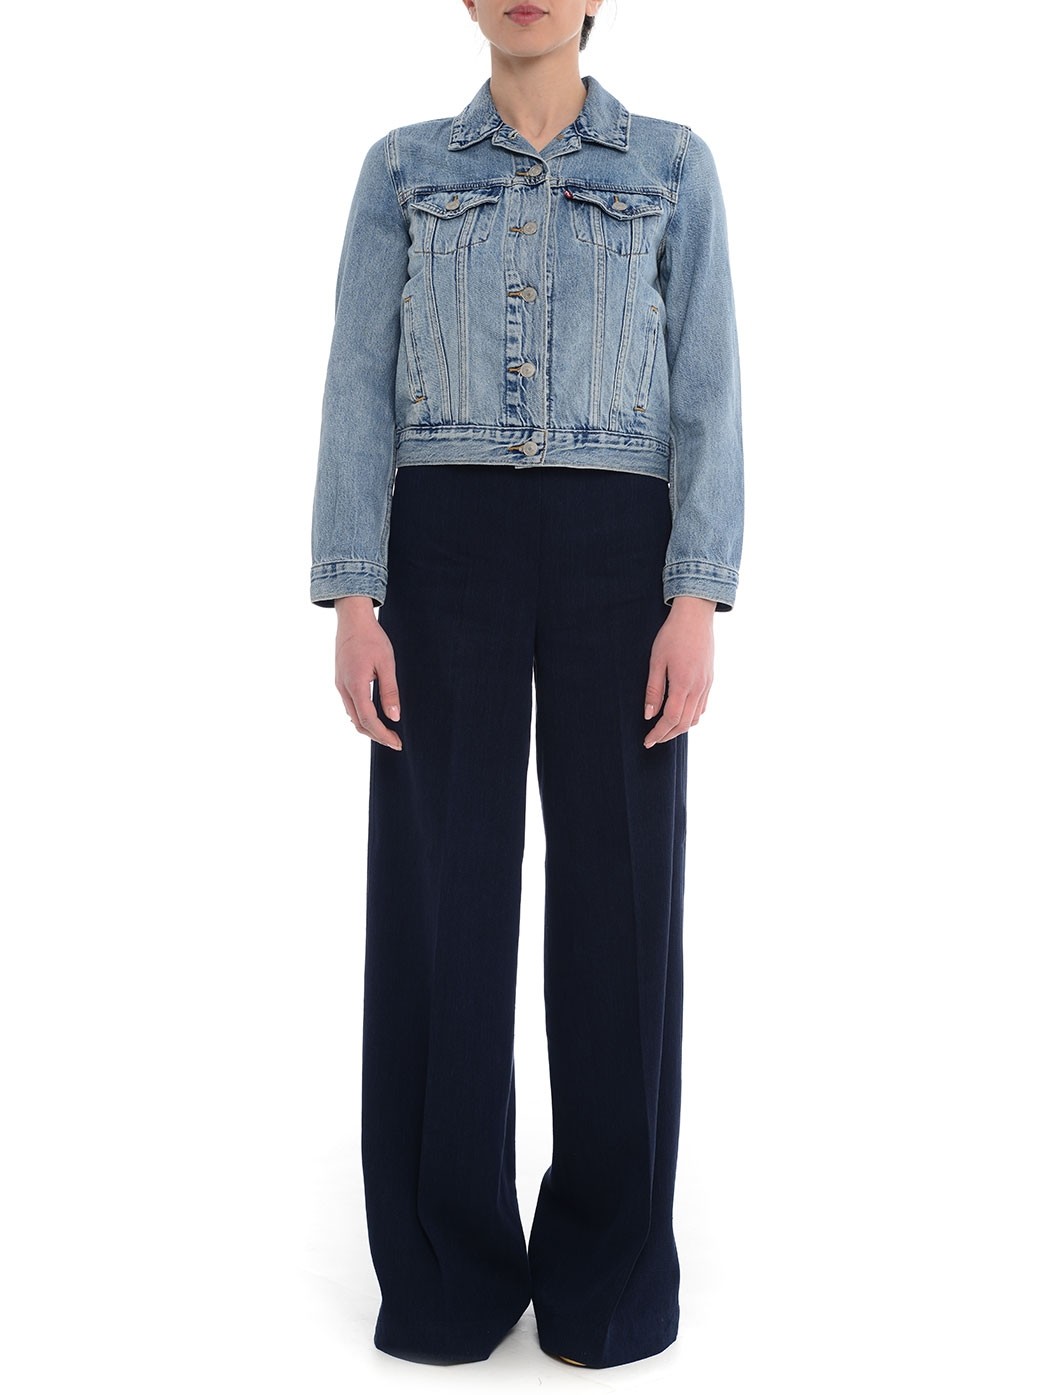  WOMENSWEAR,SPRING SUMMER COLLECTION  LEVI'S A29945